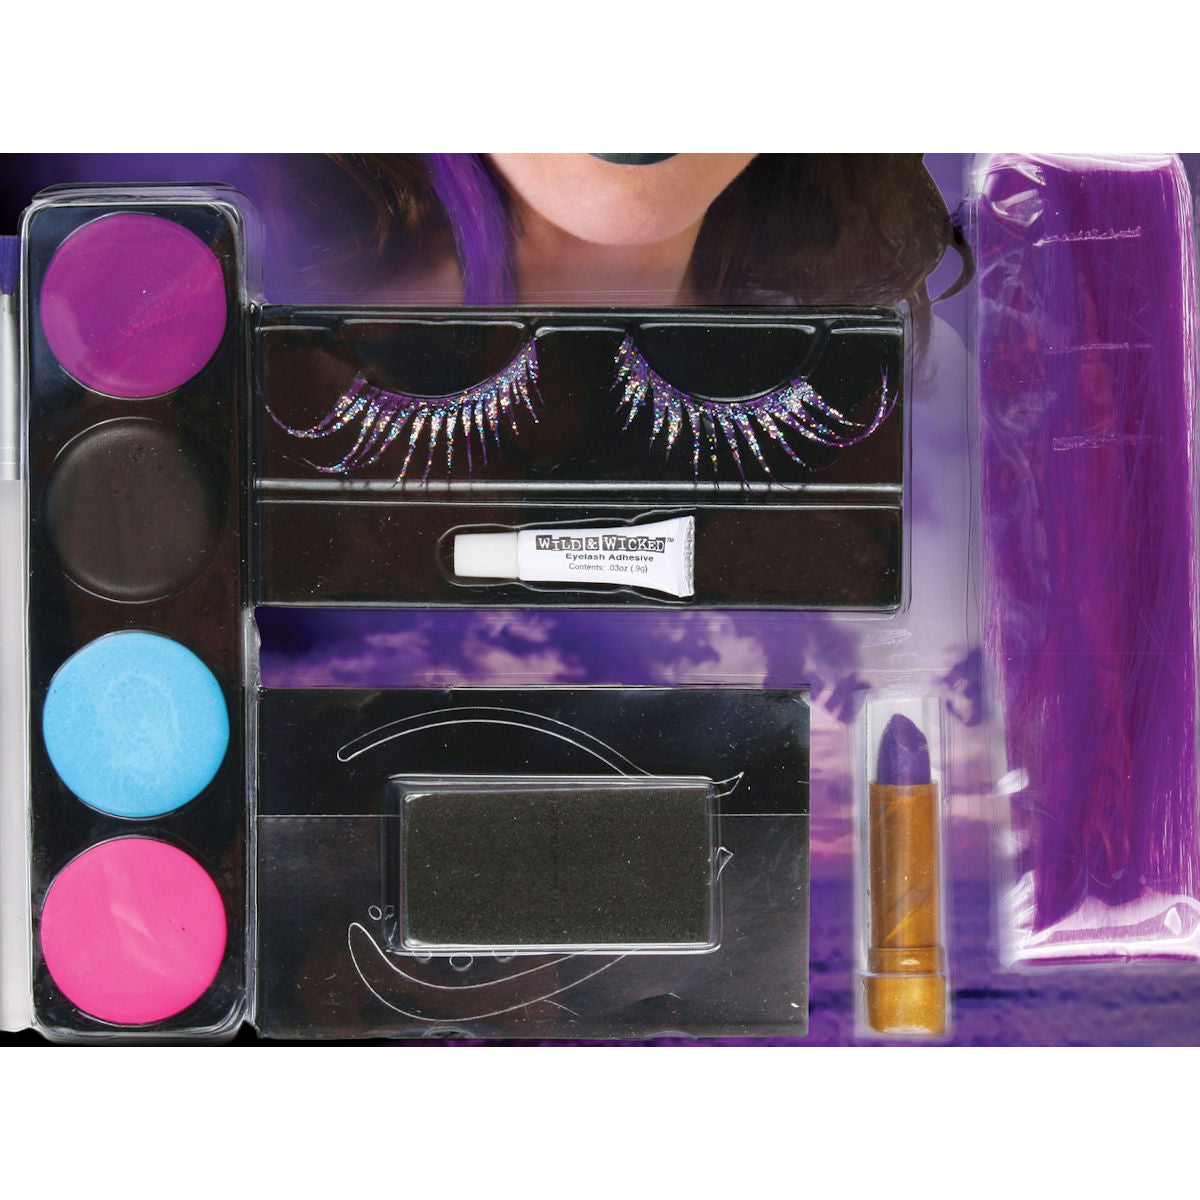 Pirate Fantasy Makeup Kit FX Kit Halloween Costume Accessory with Eyelashes